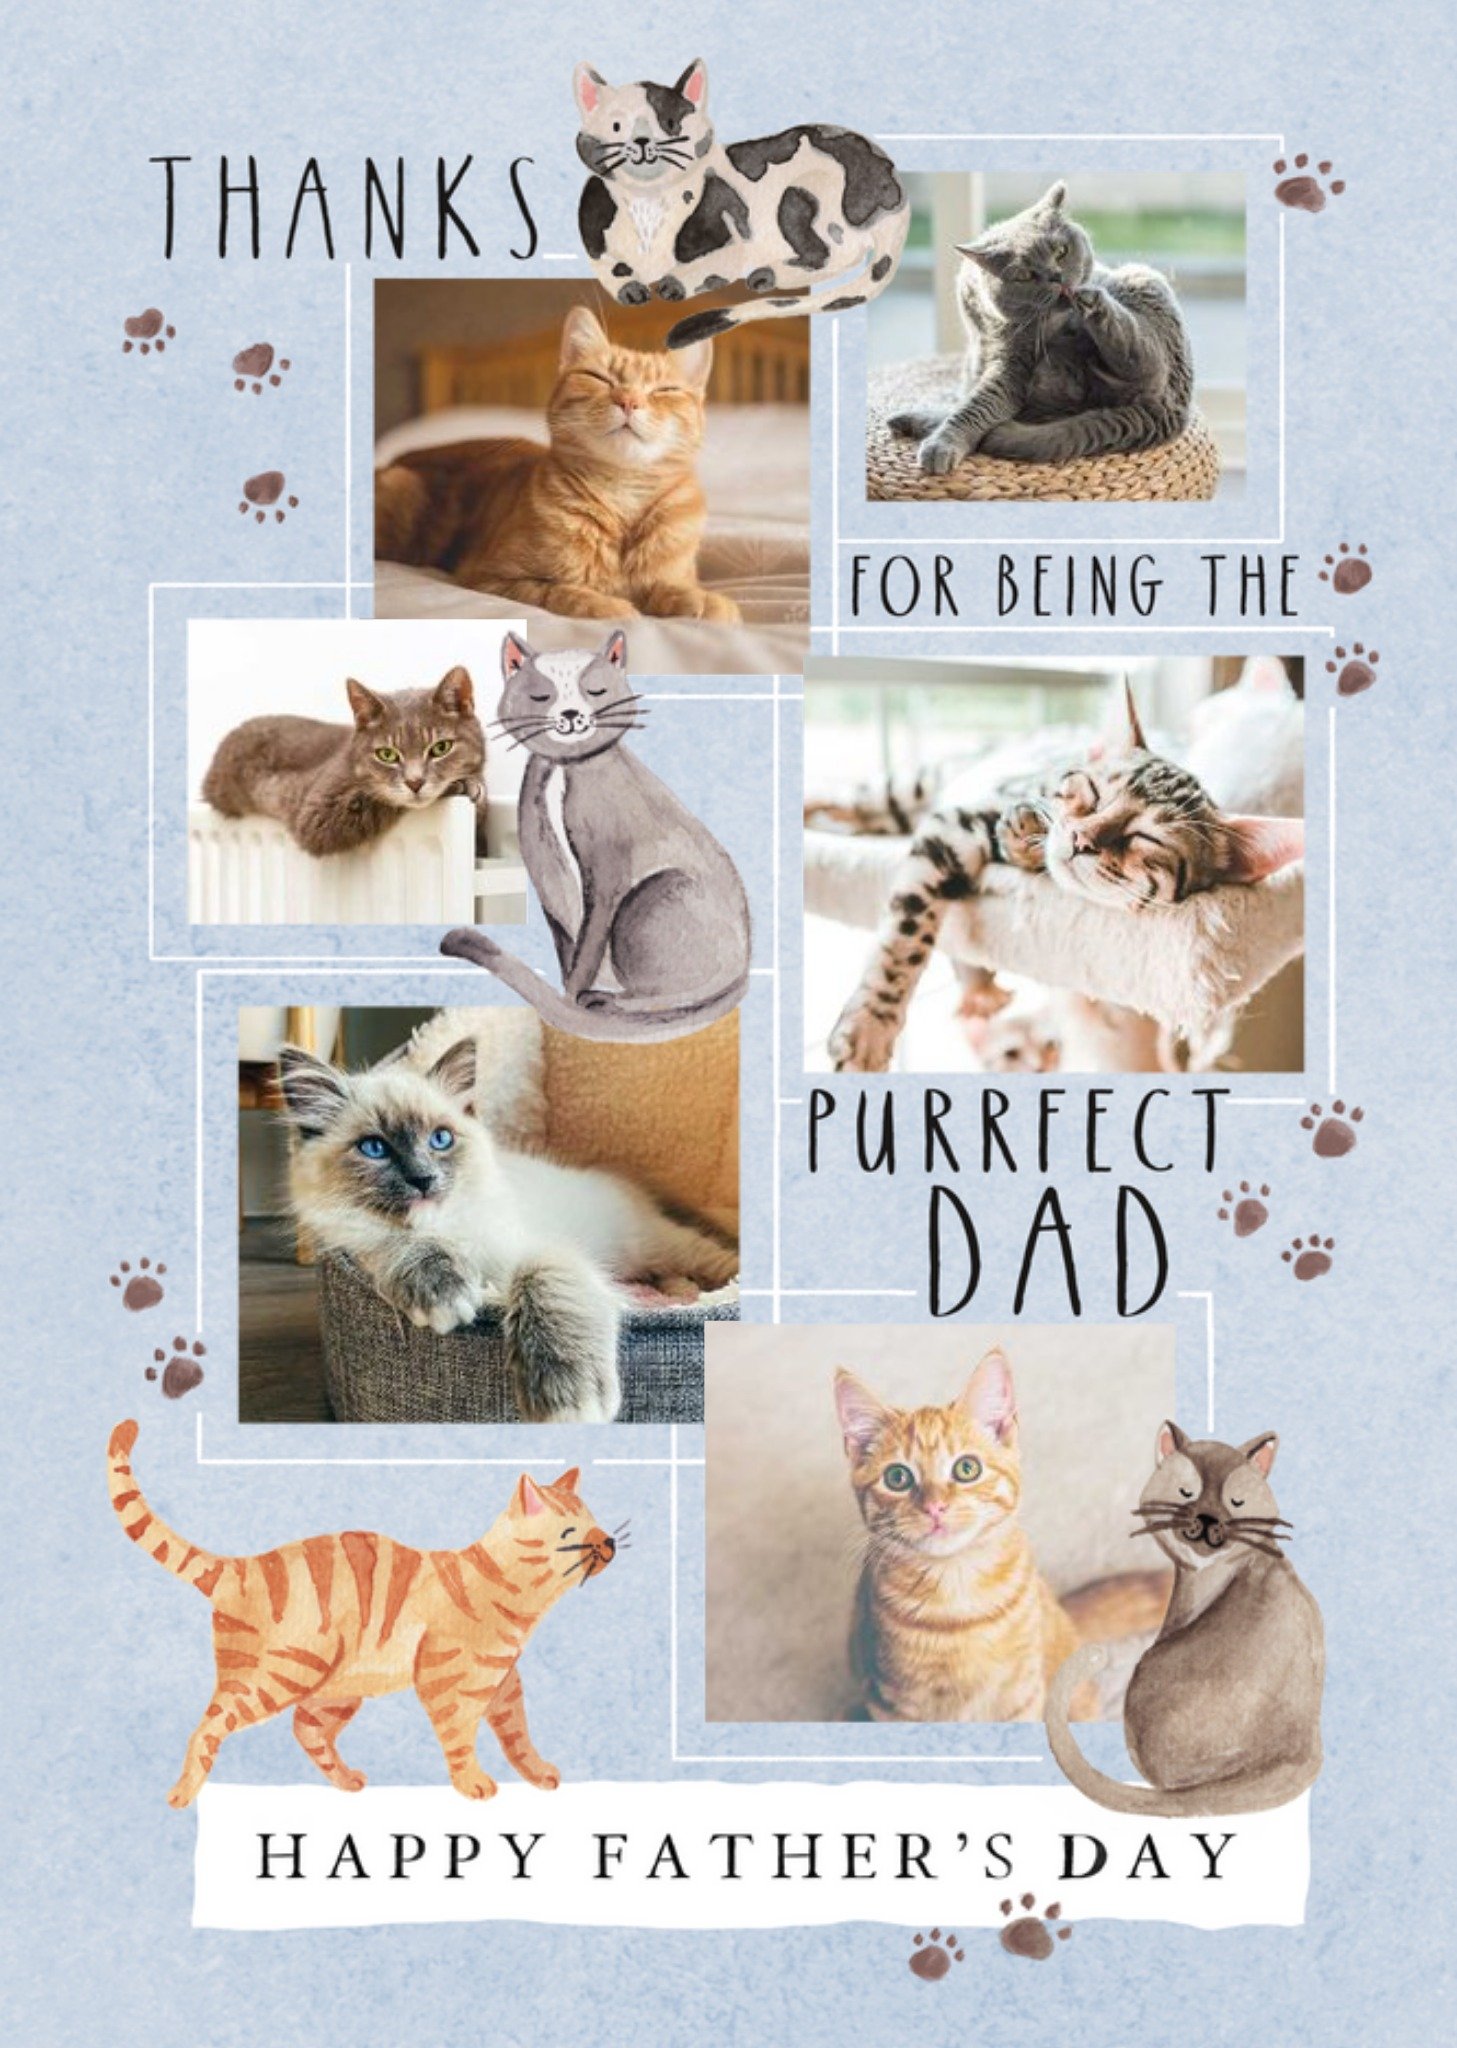 Moonpig Illustrations Of Cats With A Collage Of Six Photo Frames Purrfect Father's Day Photo Upload 